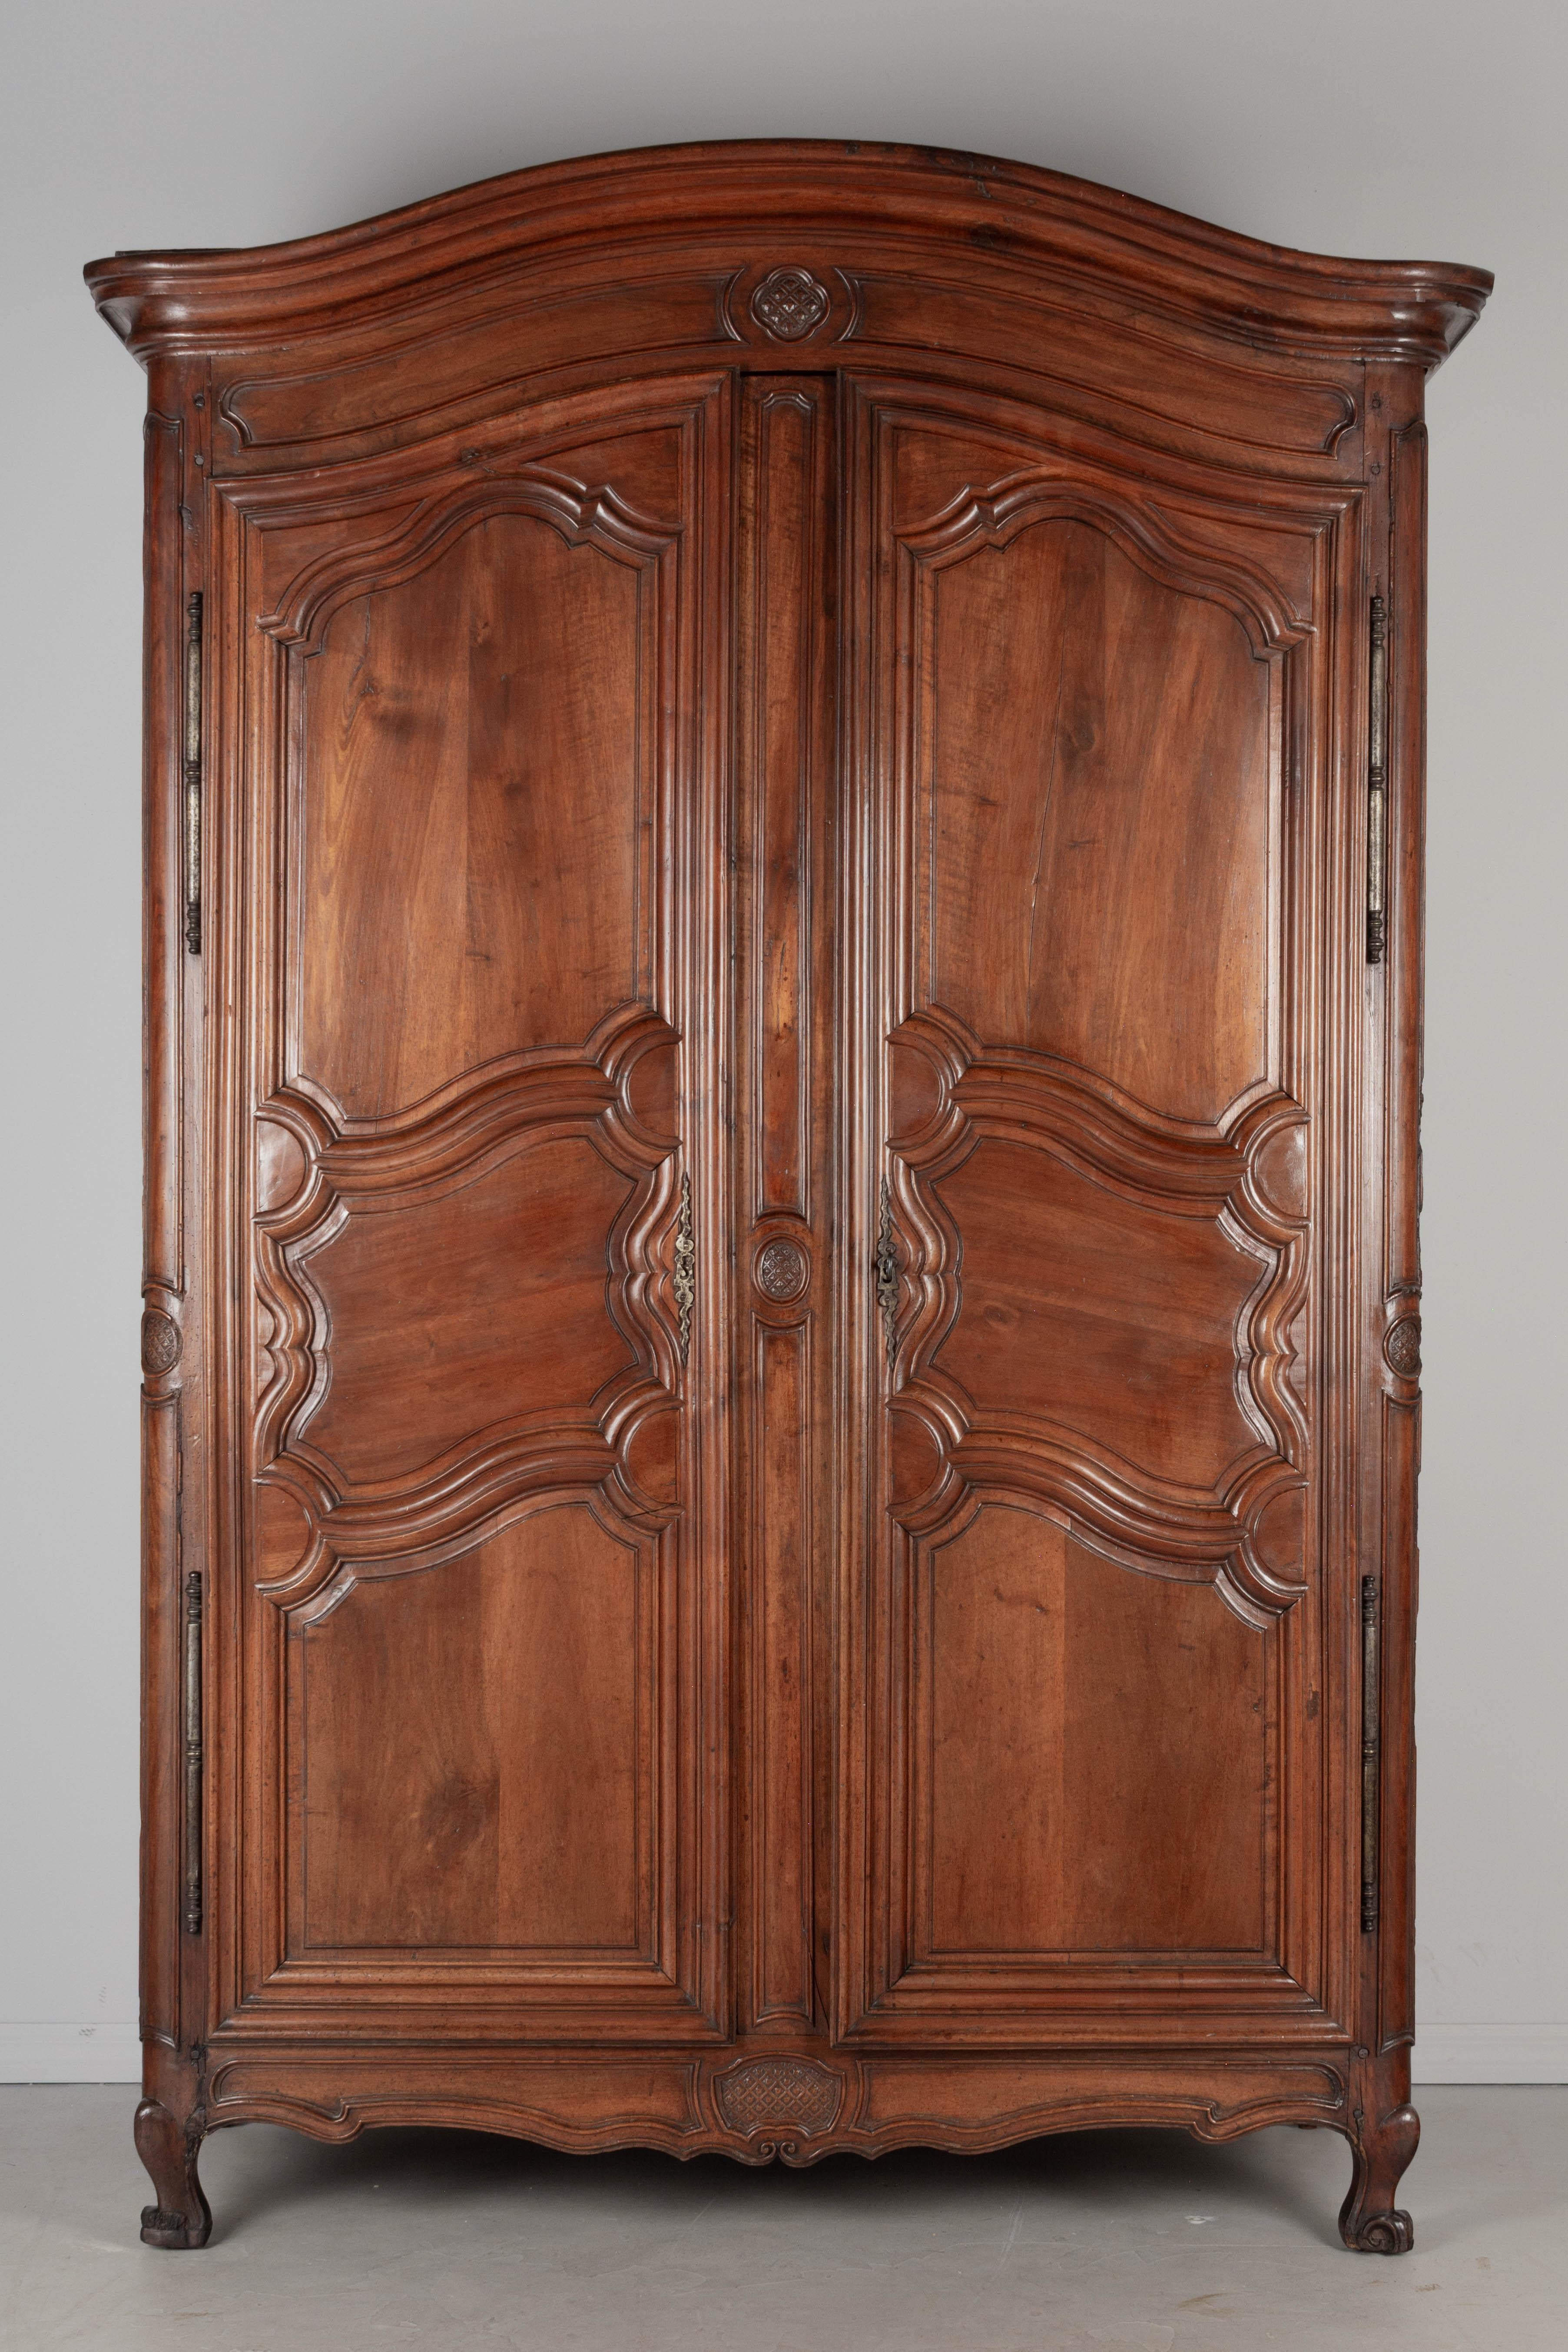 A large 18th Century French Louis XV armoire from Burgundy with chapeau de gendarme crown. Made from thick planks of solid walnut with twelve raised panels. Simple hand-carved decorative details on the apron and crown and on the rounded front